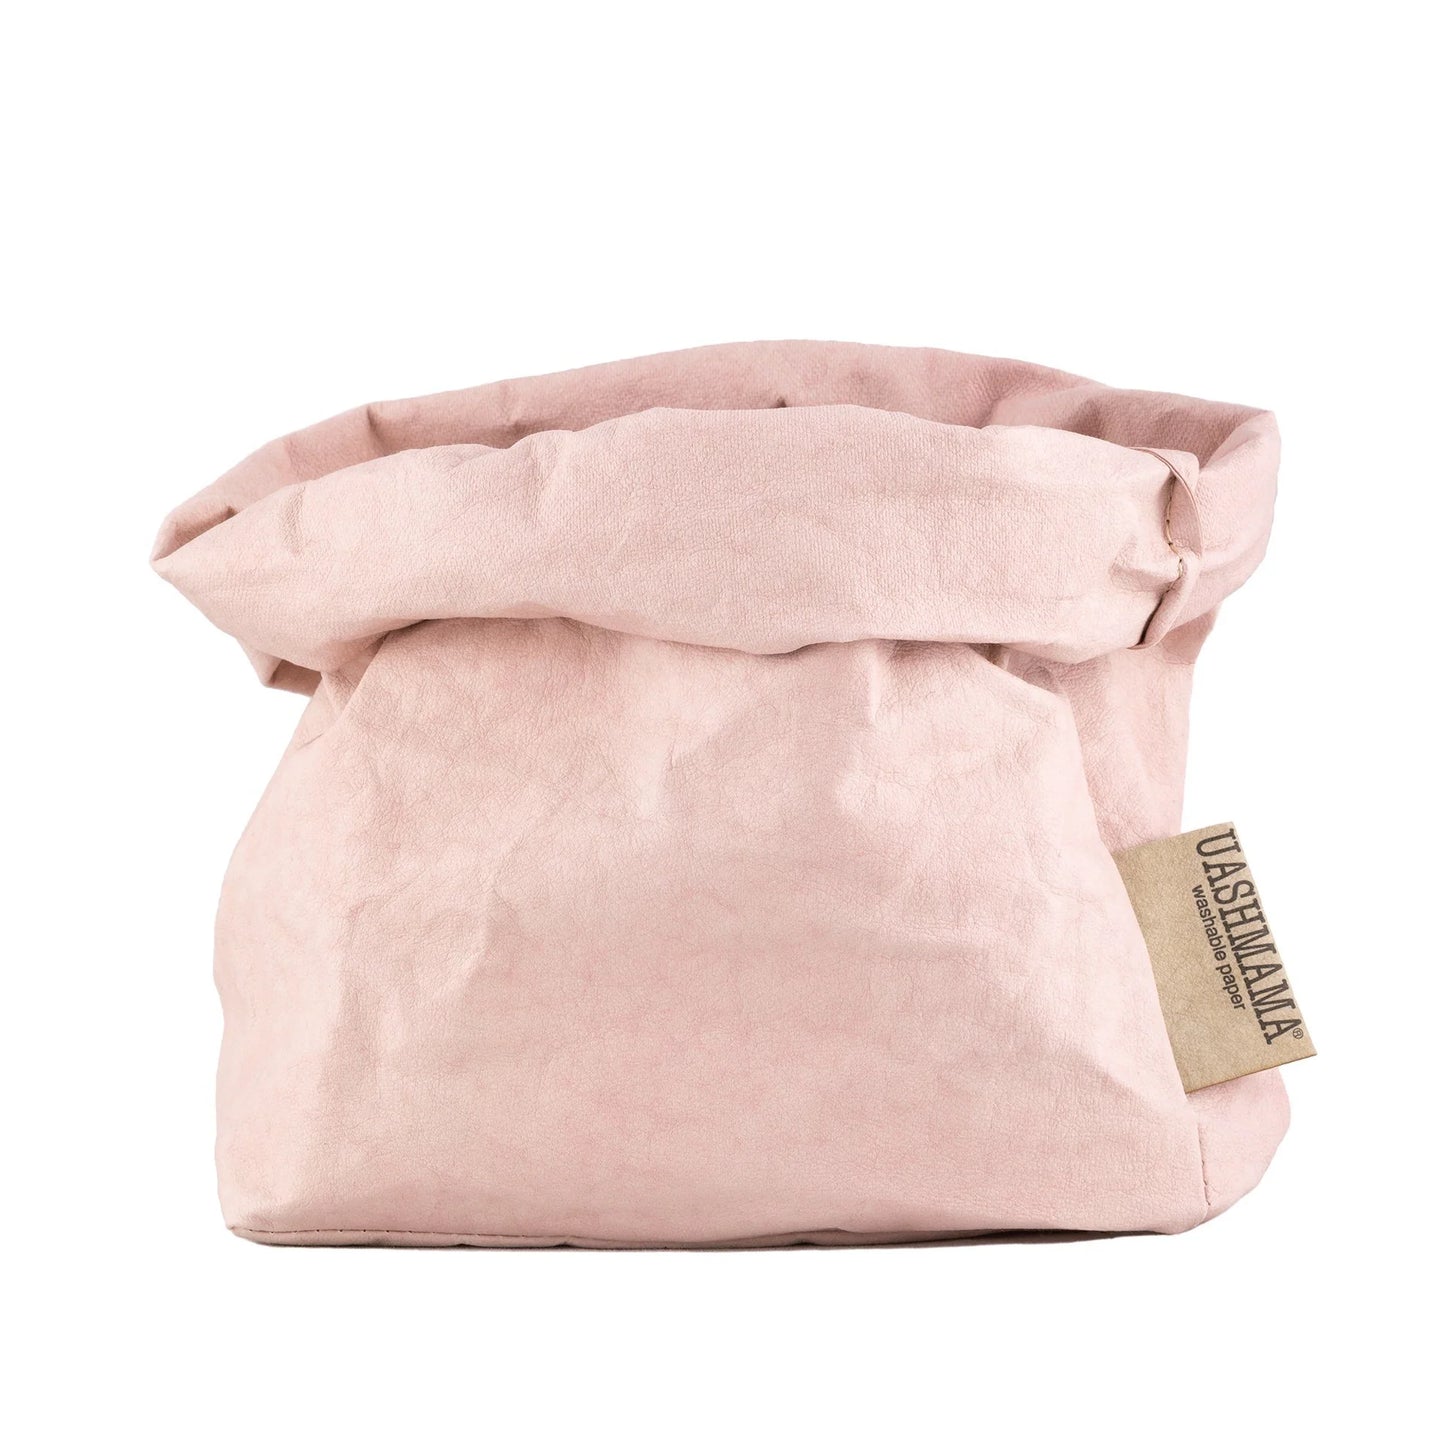 A washable paper bag in medium in pale pink. The top is rolled down and the bag is empty.